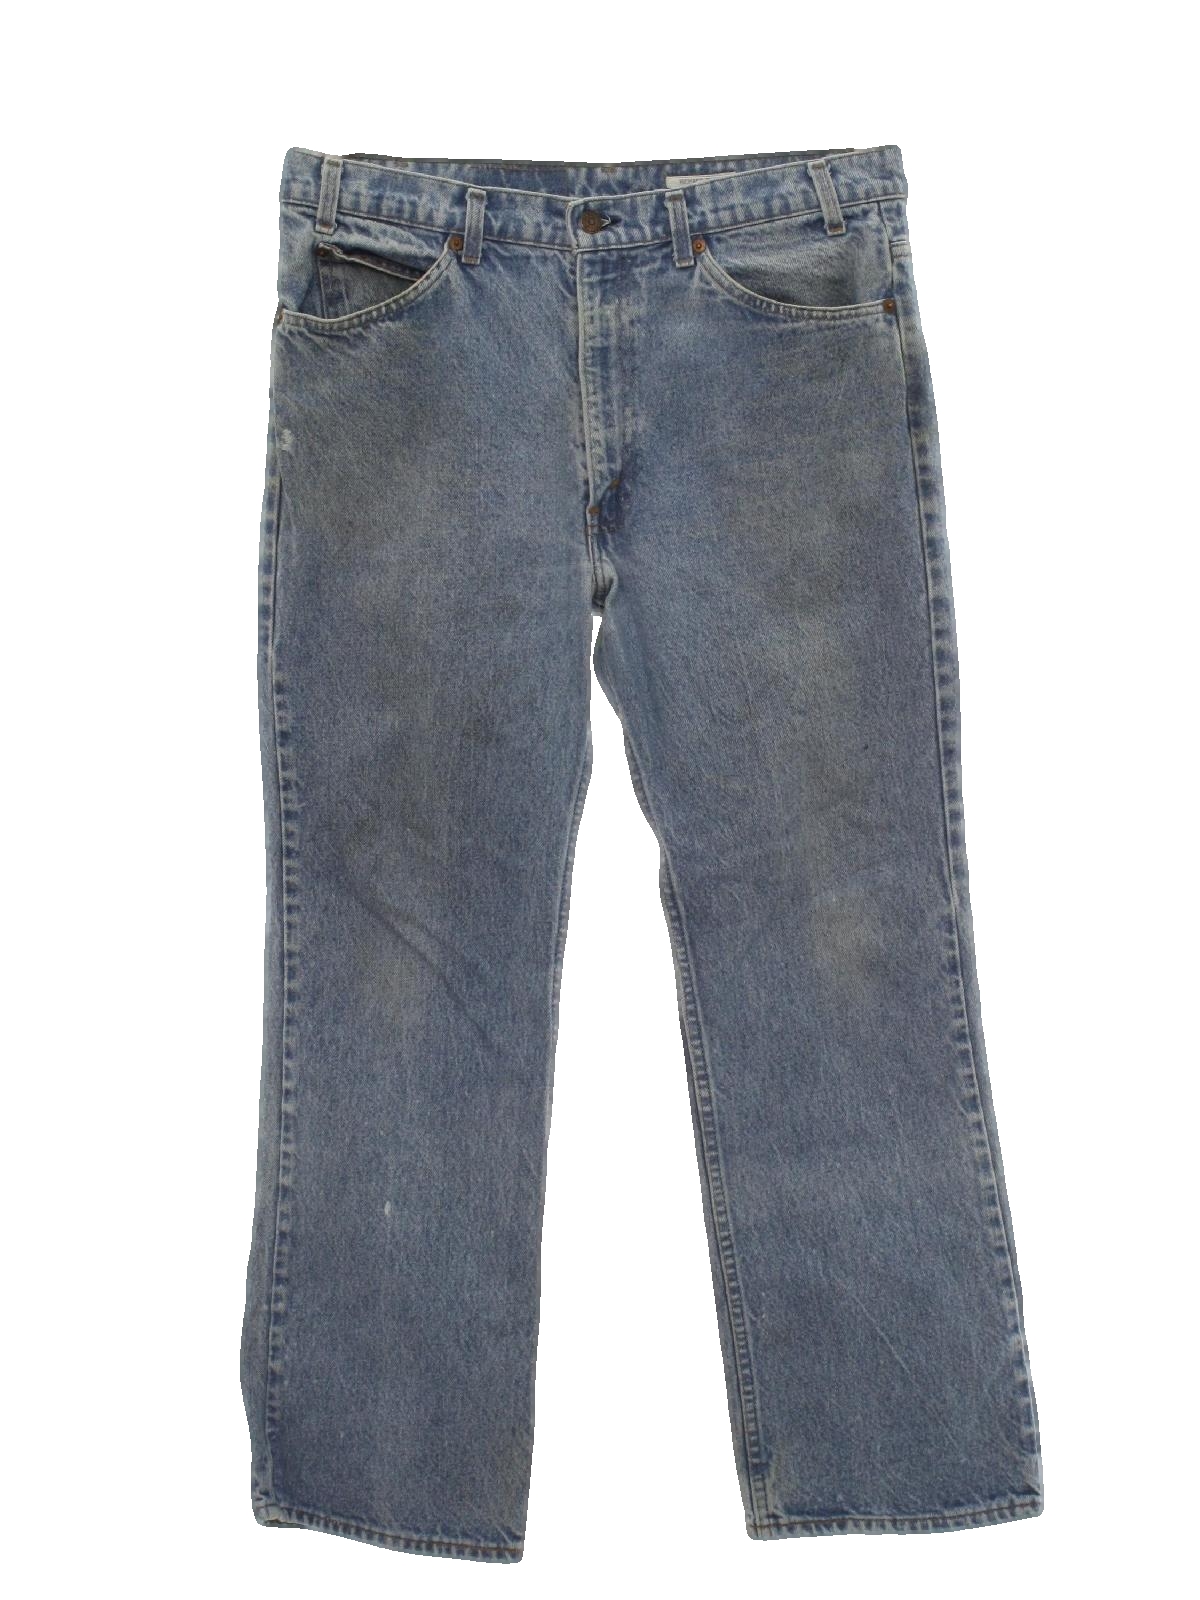 80s Retro Pants: 80s Levis 517- Mens stone washed slightly faded and ...